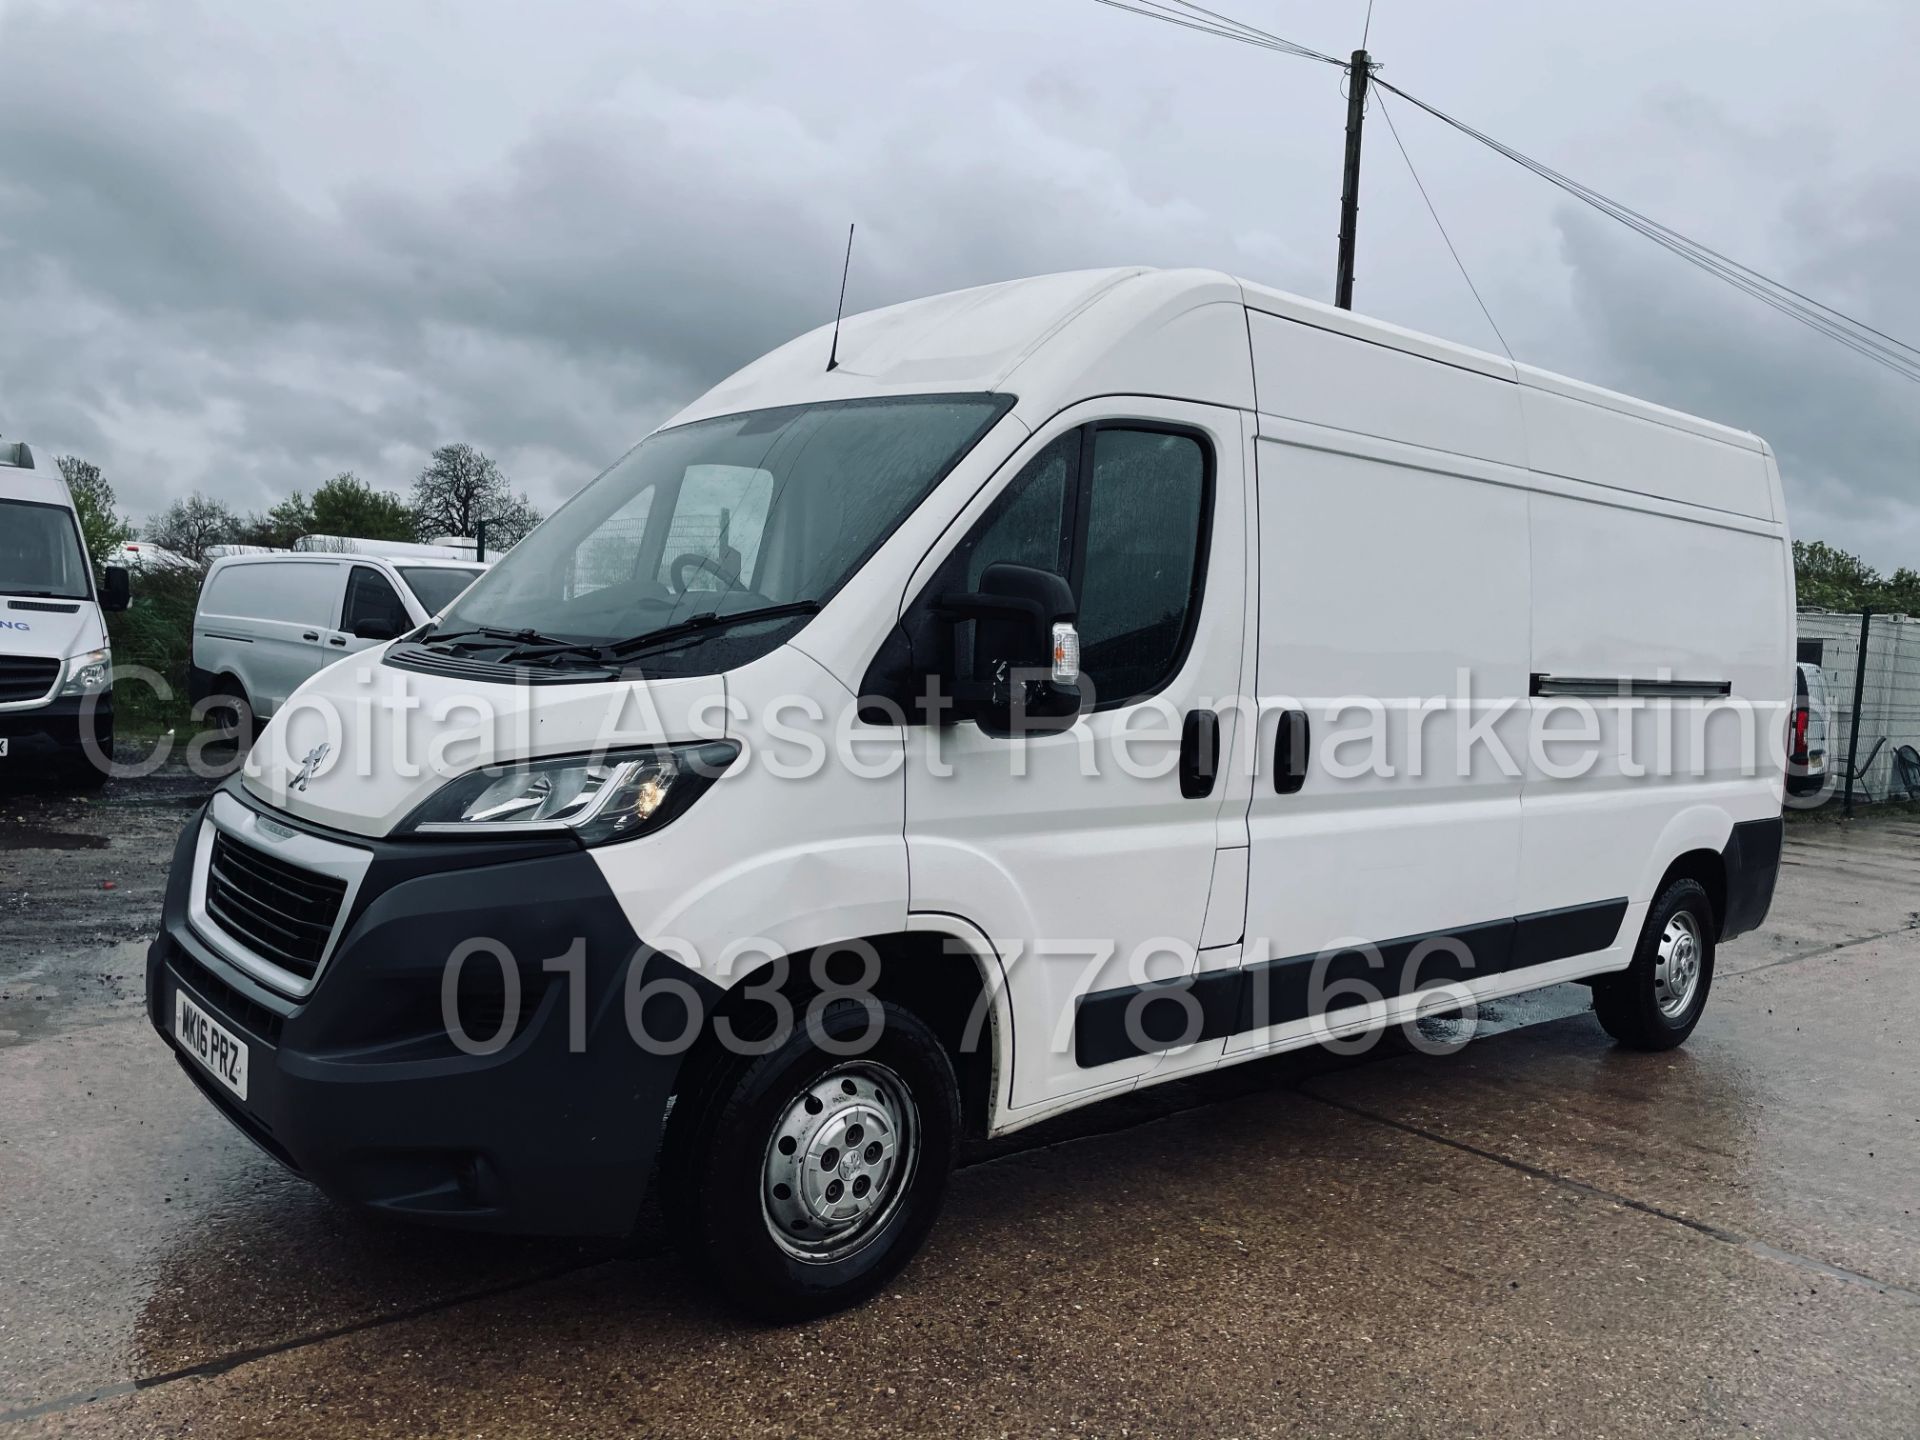 (On Sale) PEUGEOT BOXER 335 *PROFESSIONAL* LWB HI-ROOF (2016) '2.2 HDI - 6 SPEED' *A/C* (1 OWNER) - Image 6 of 41